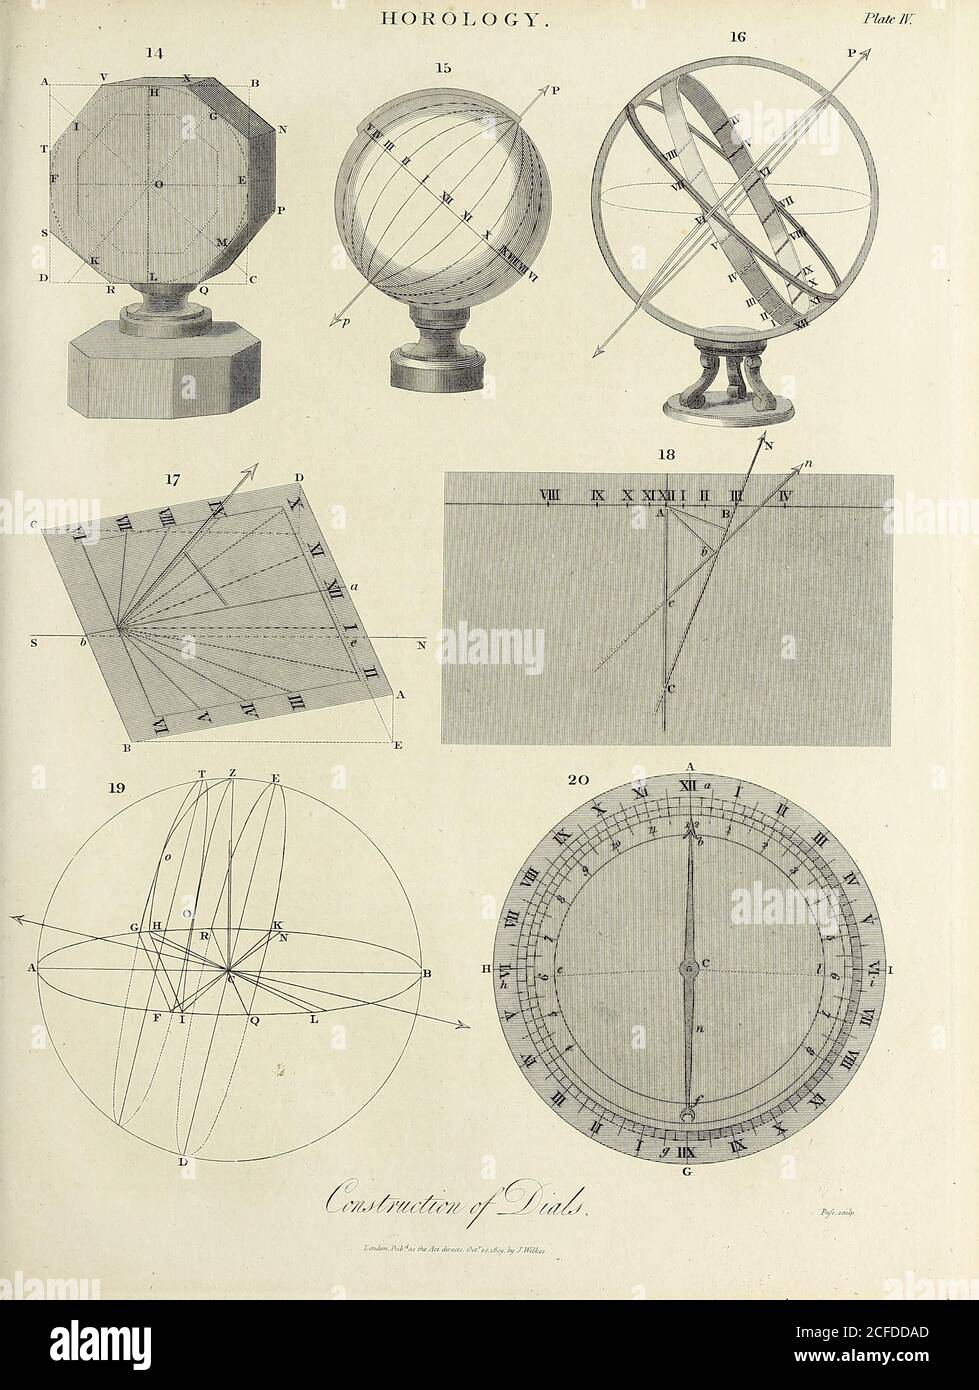 Construction of Dials, Horology [study of the measurement of time. Clocks, watches, clockwork, sundials, hourglasses, clepsydras, timers, time recorders, marine chronometers]. Copperplate engraving By J. Pafs From the Encyclopaedia Londinensis or, Universal dictionary of arts, sciences, and literature; Volume X;  Edited by Wilkes, John. Published in London in 1811 Stock Photo